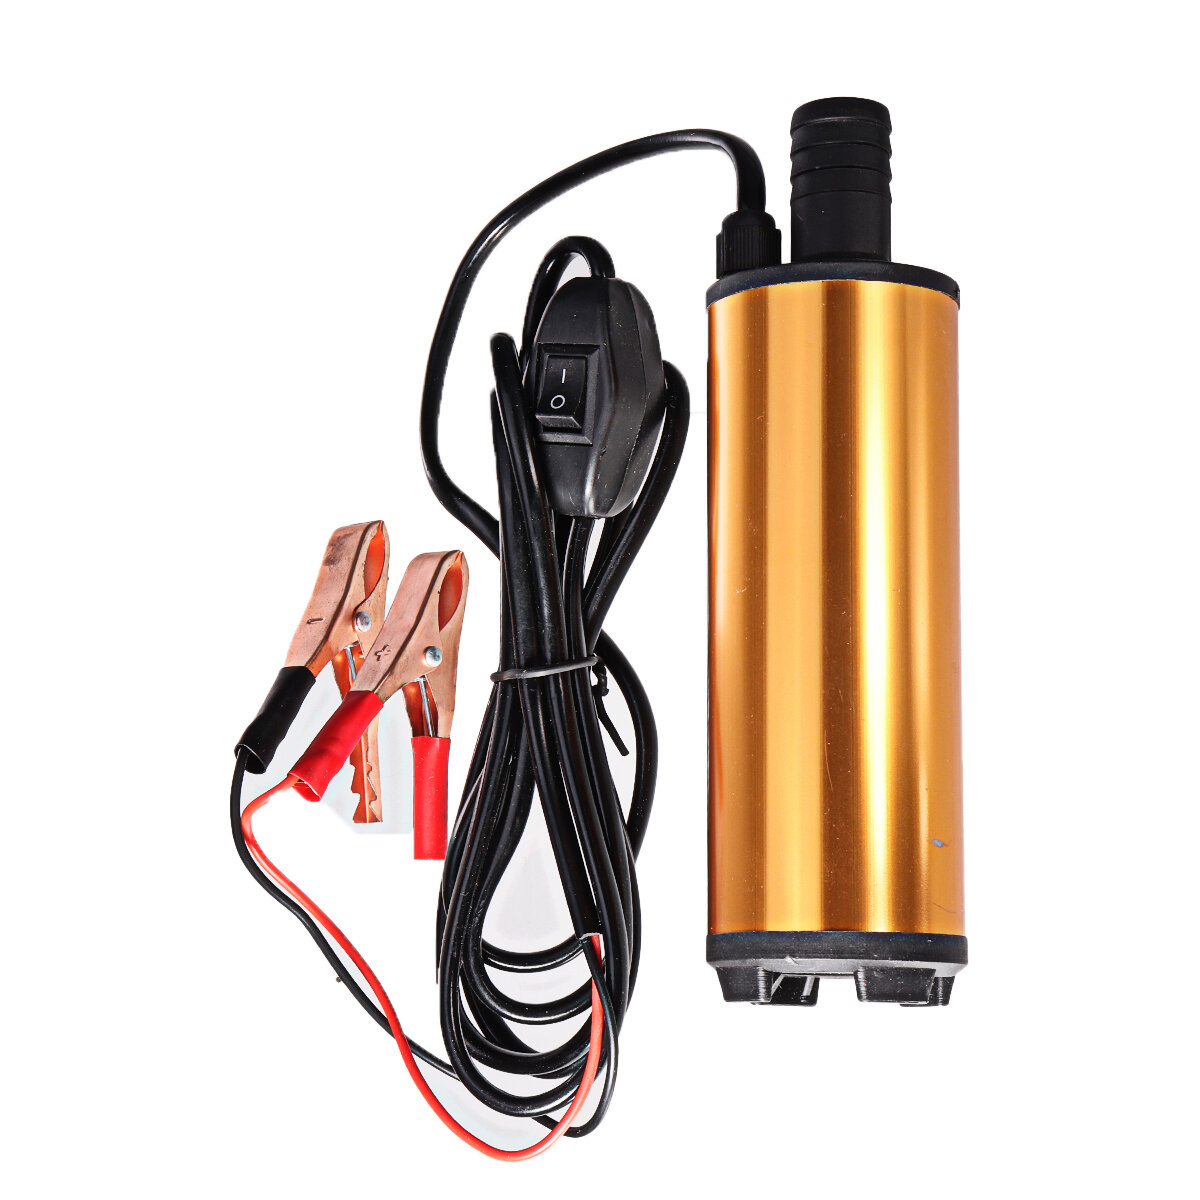 

12V/24V DC Electric Submersible Pump For Pumping Oil Water Stainless Steel Shell Fuel Transfer Pump